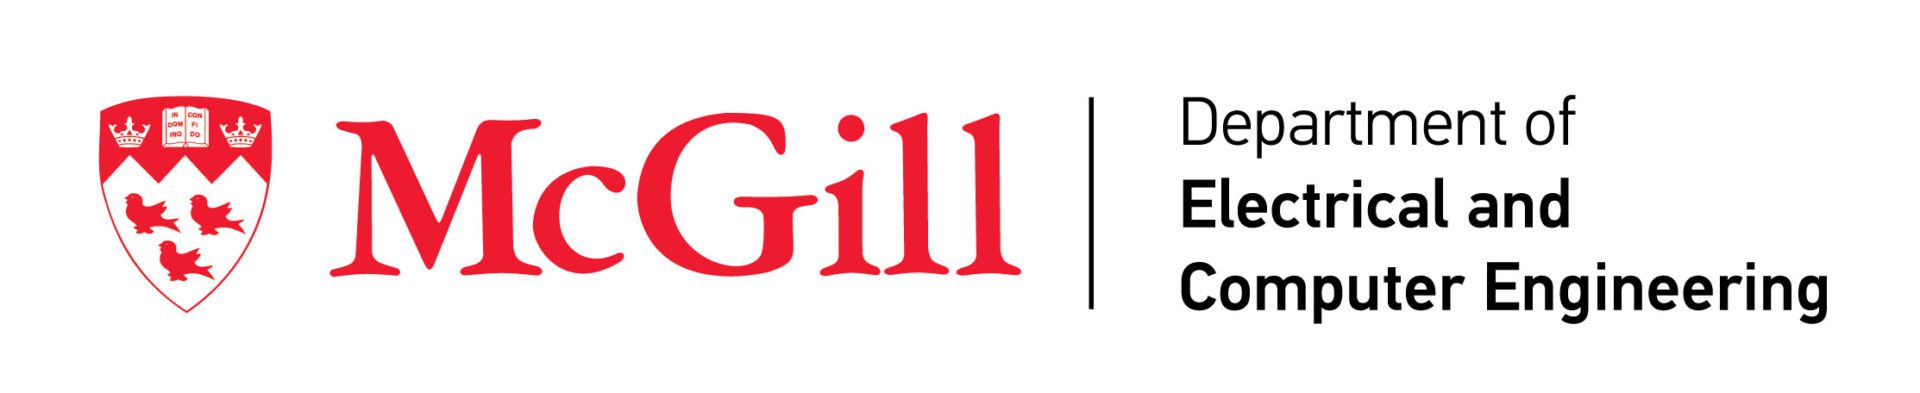 McGill University, Department of Electrical and Computer Engineering logo